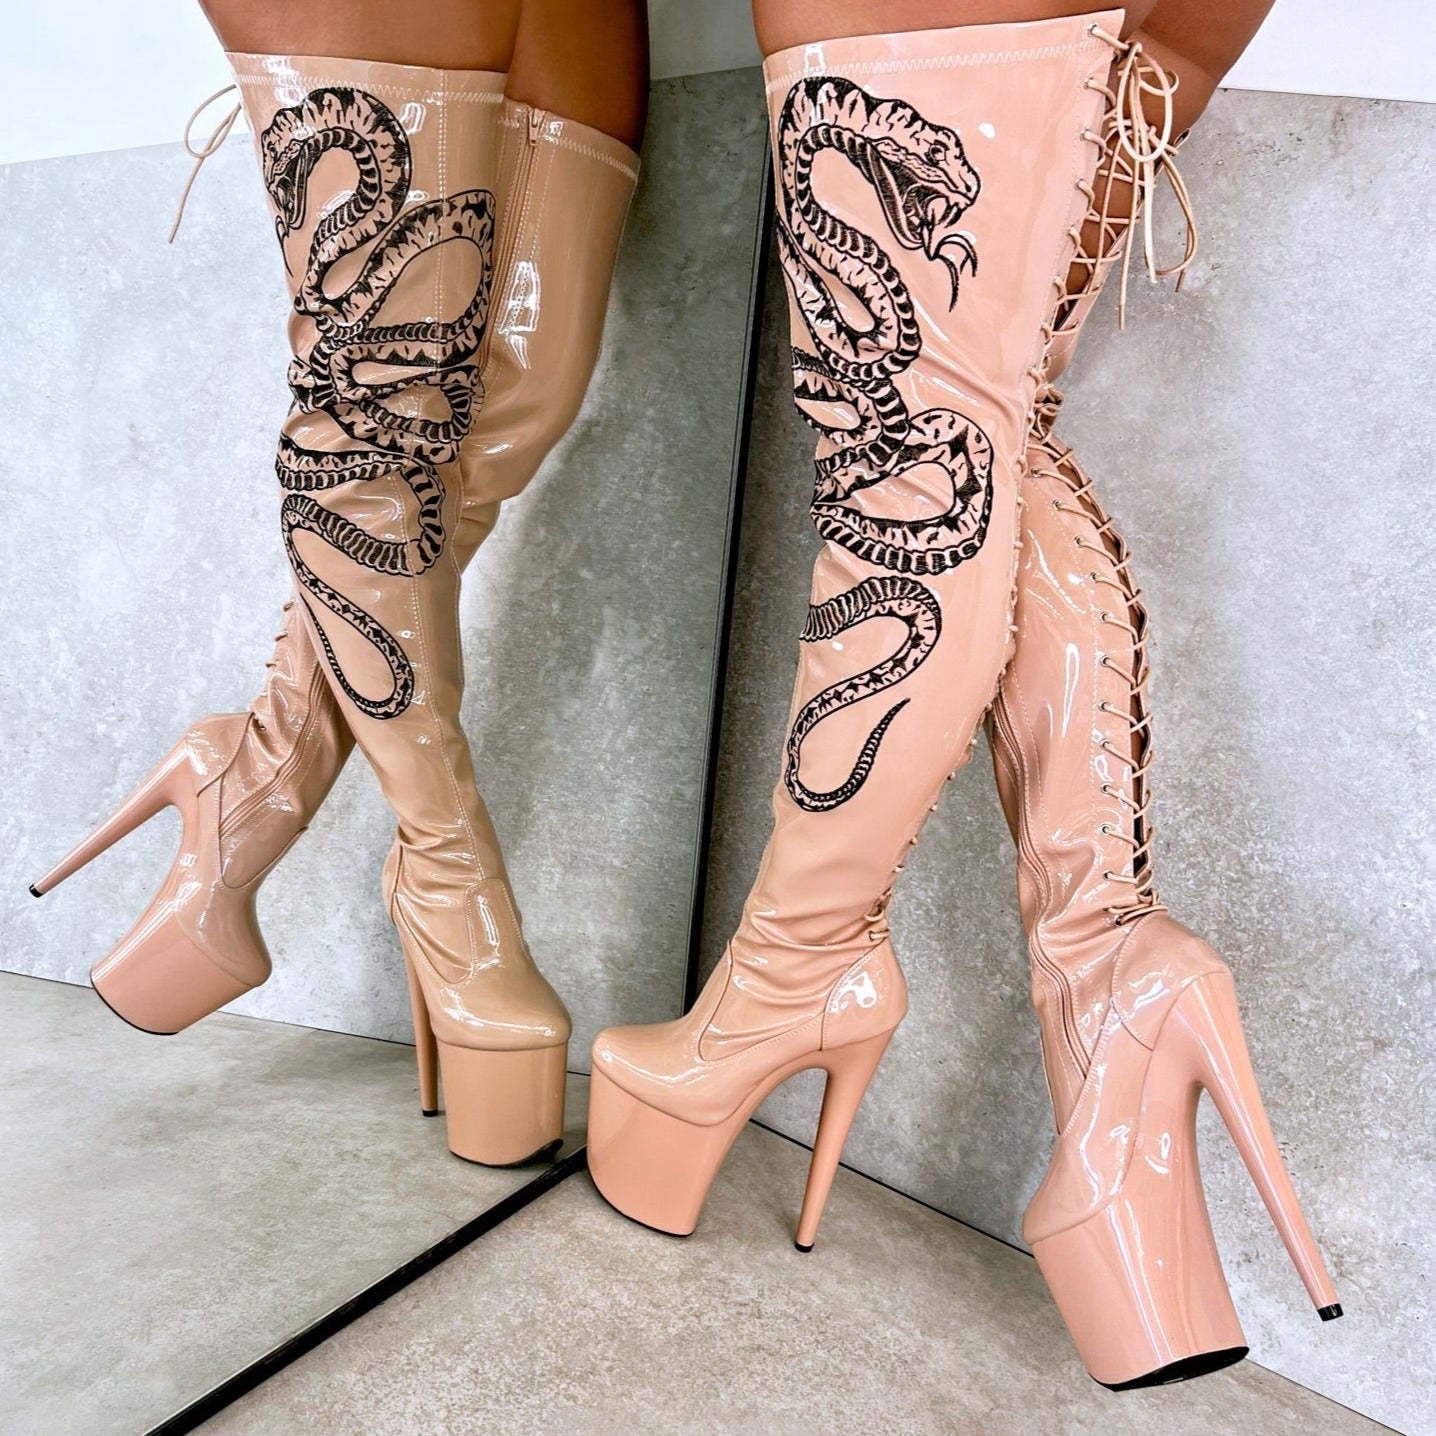 VIPER Boot Tan with Black Thicc Thigh High - 8INCH